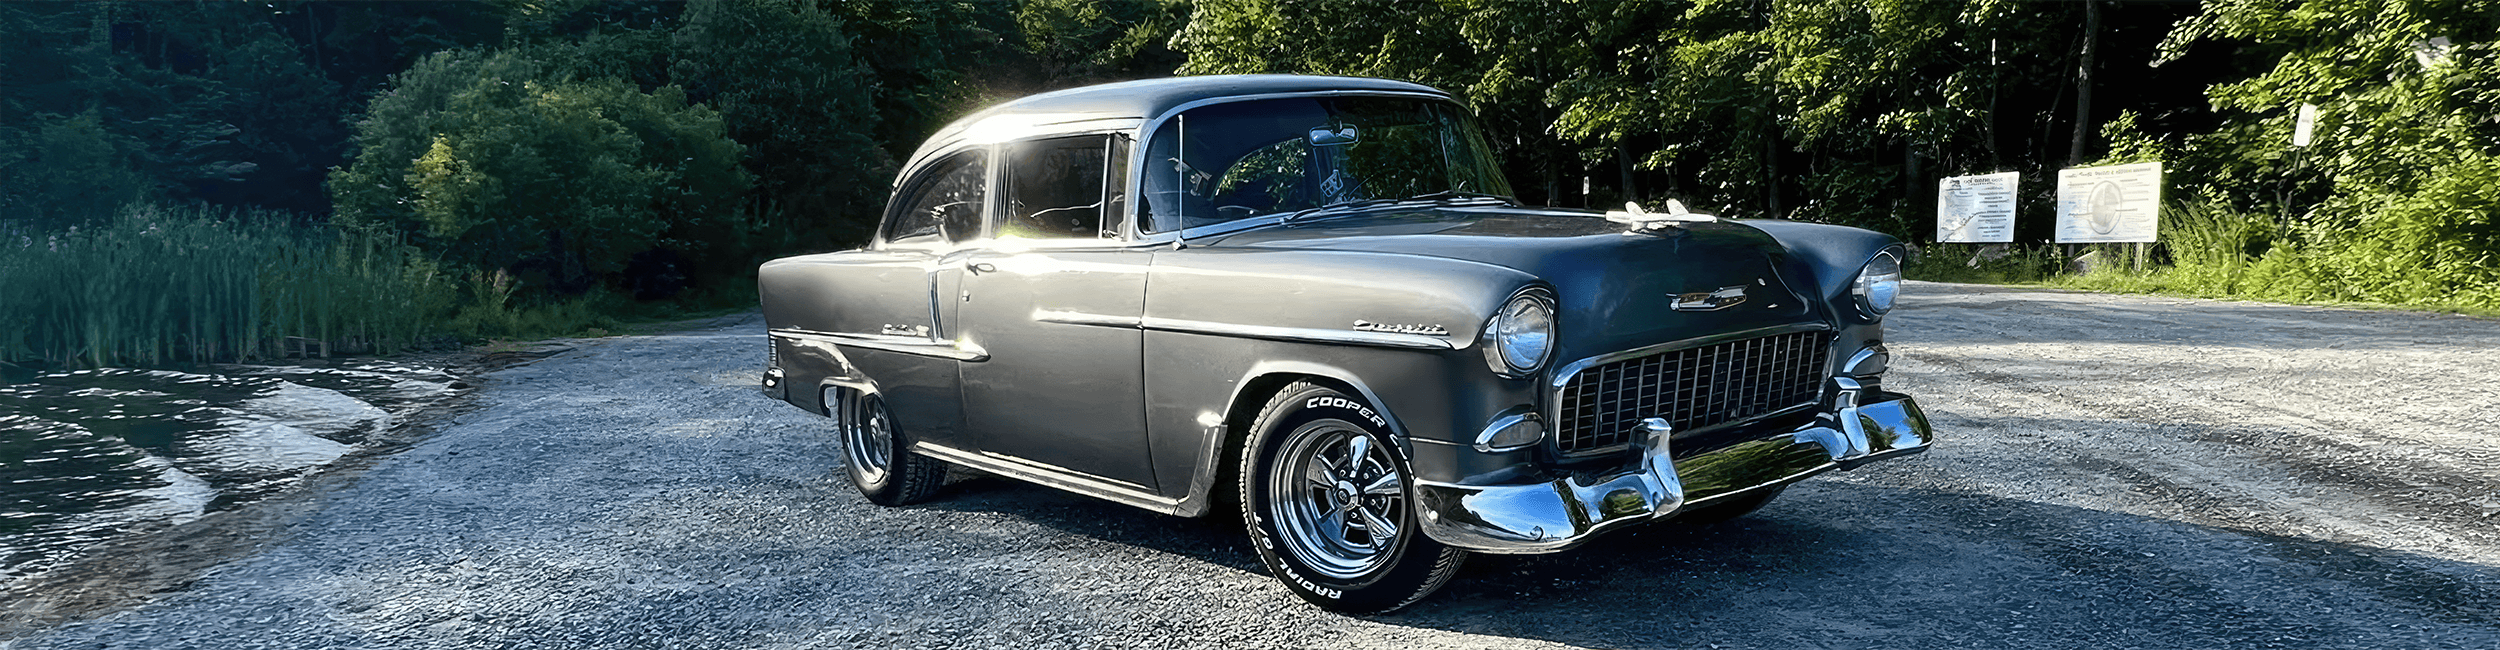 1955 Chevy powered by a BluePrint Engines' 376 c.i.